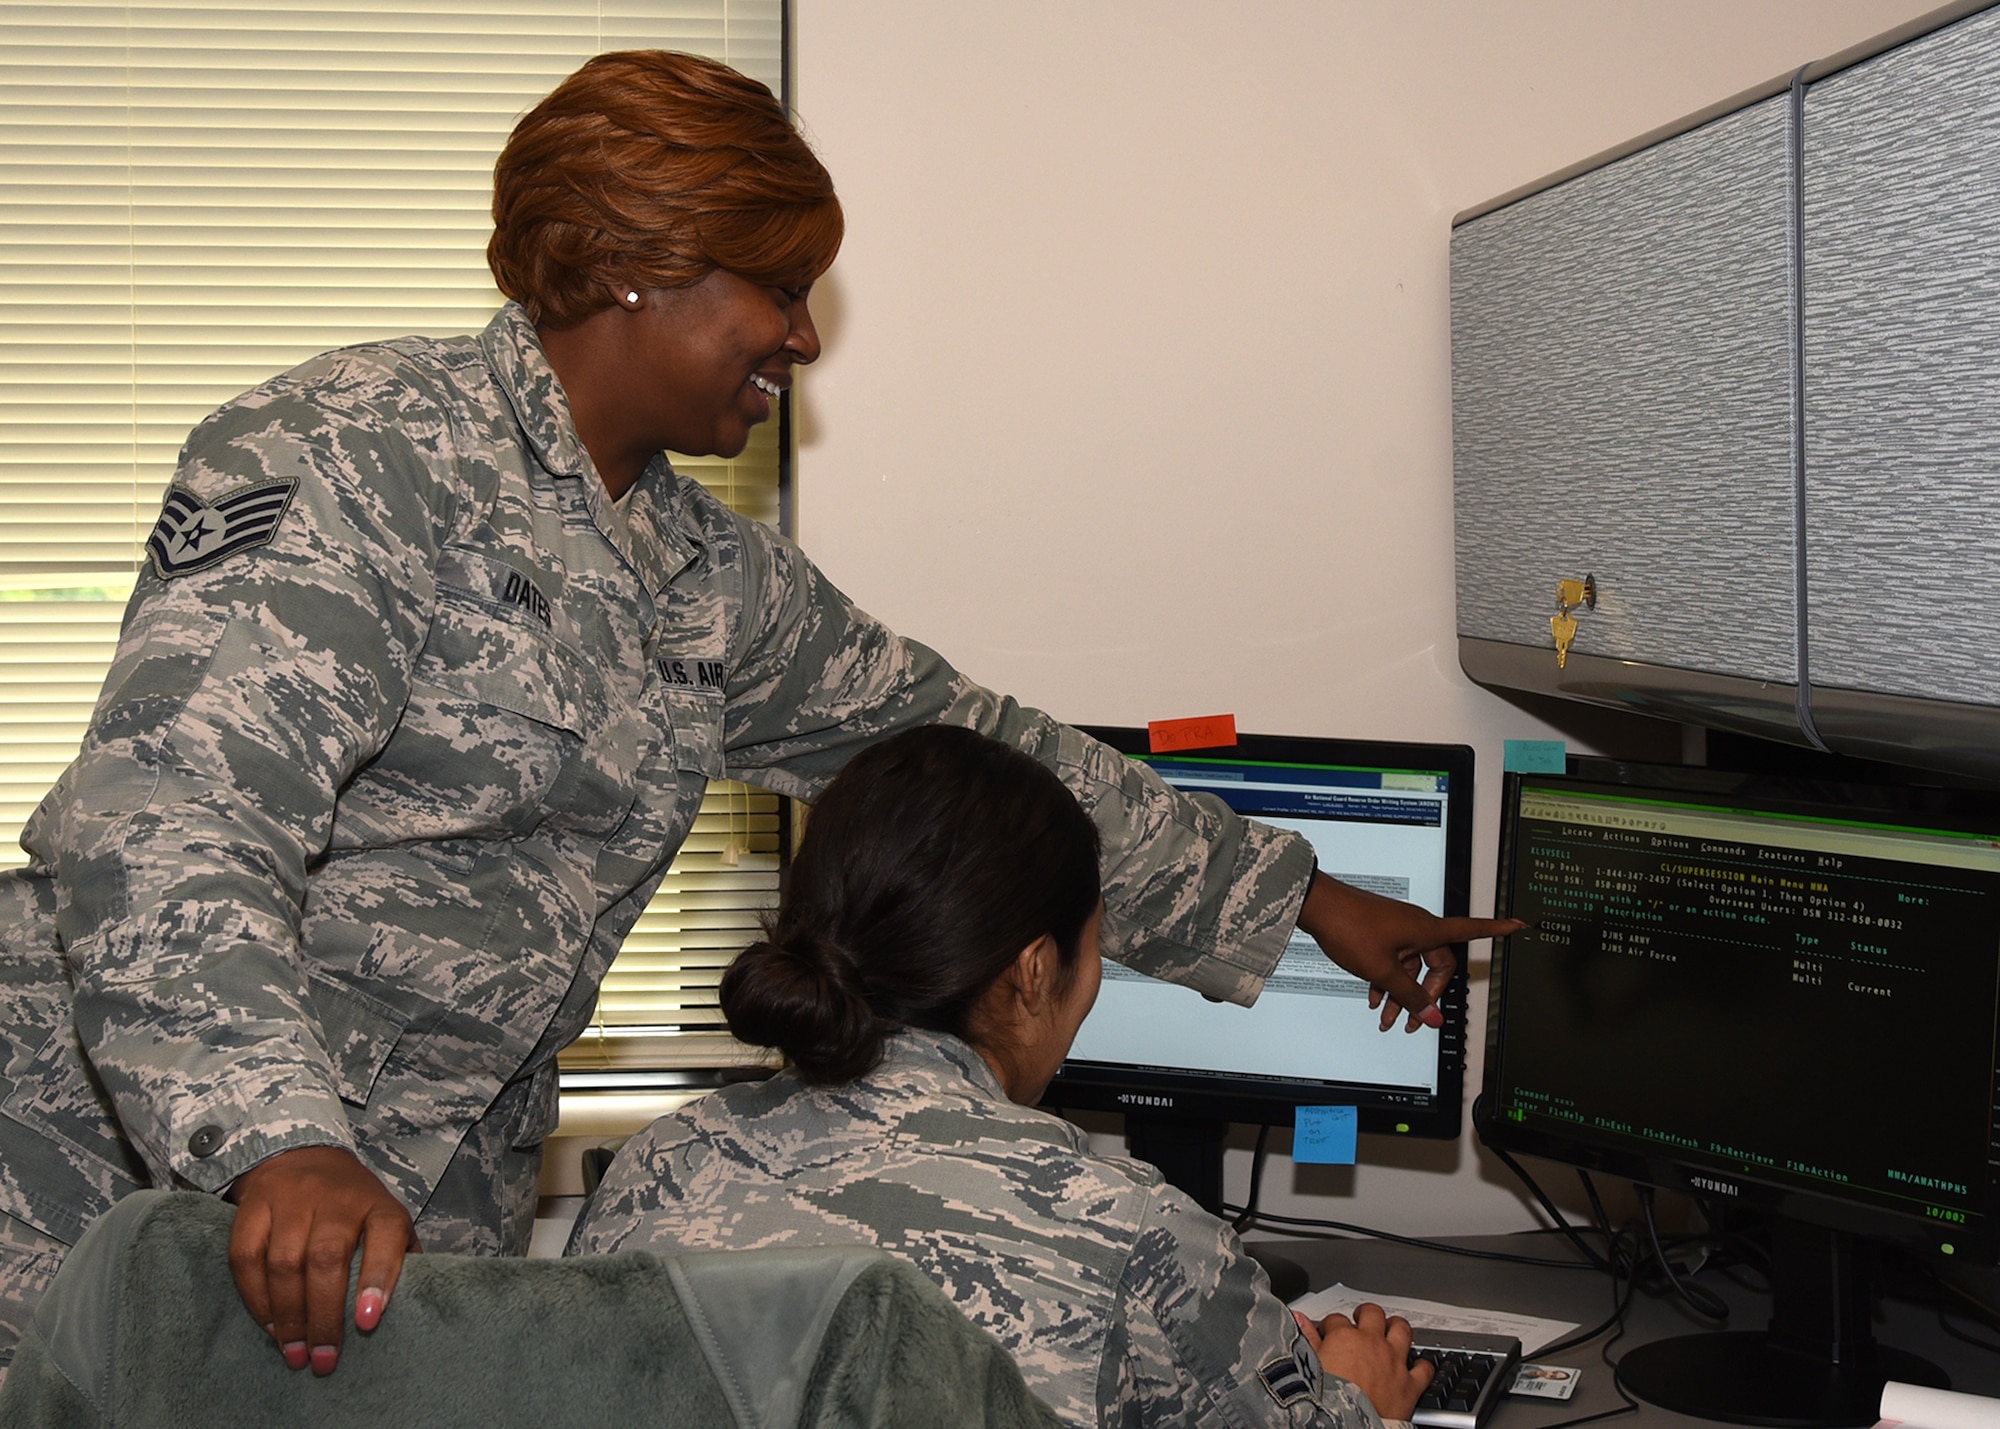 SSgt. Patricia Dates assists a young airmen with a financial question Sep. 1, 2016 at Warfield Air National Guard Base, Middle River, Md. Dates is the Maryland Air National Guard September Spotlight Airman. (U.S. Air National Guard photo by Airman 1st Class Enjoli Saunders/RELEASED)

